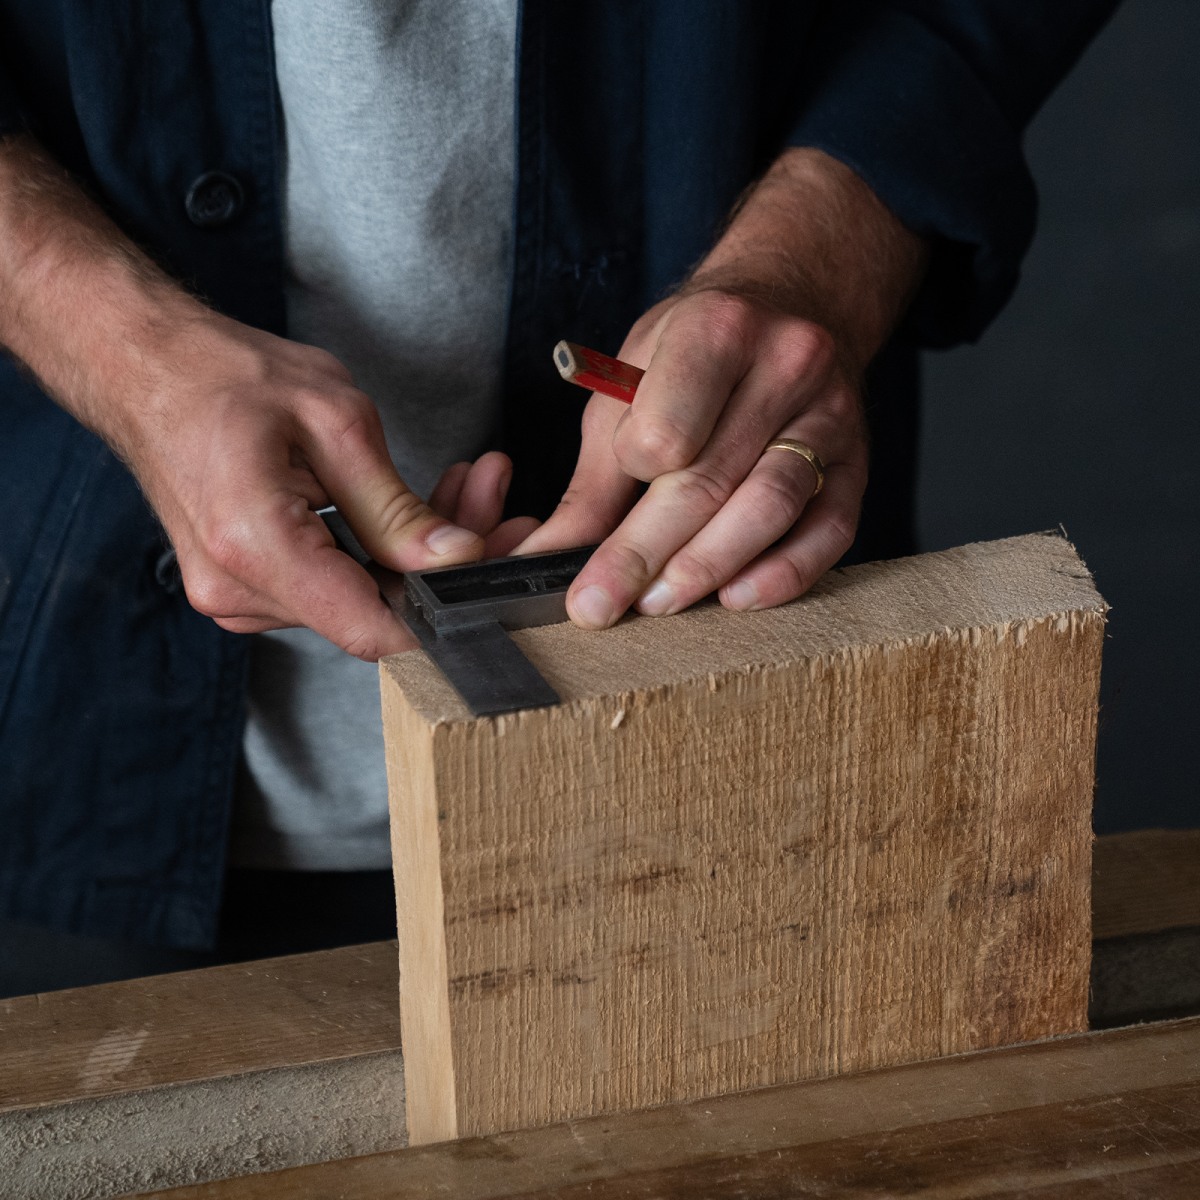 Basic Carpentry Course for Beginners